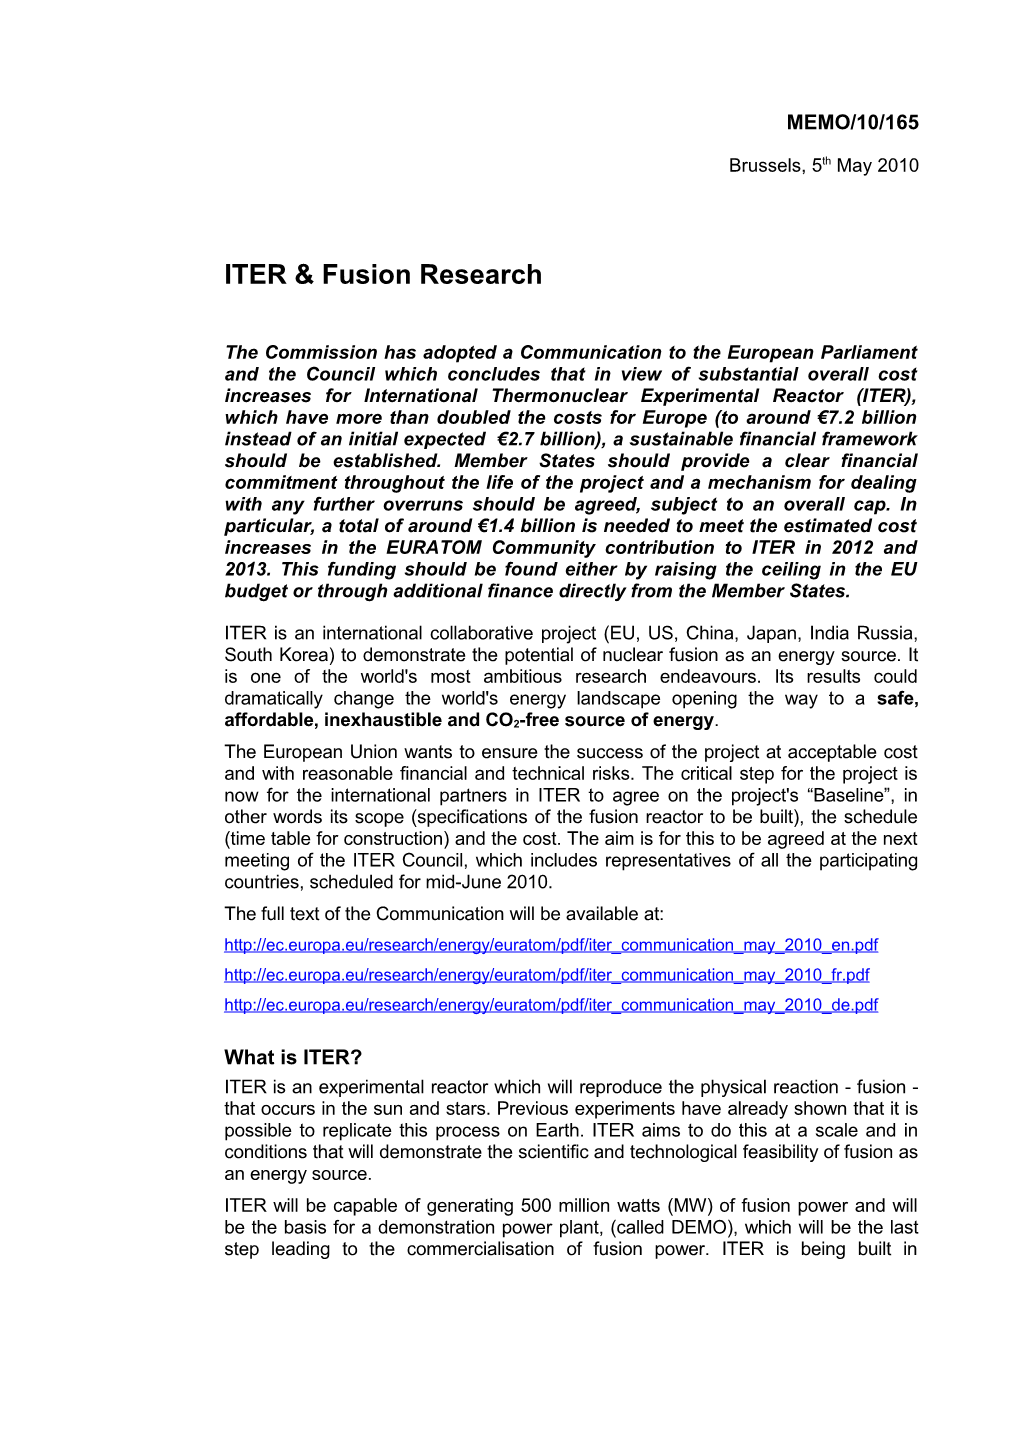 ITER & Fusion Research